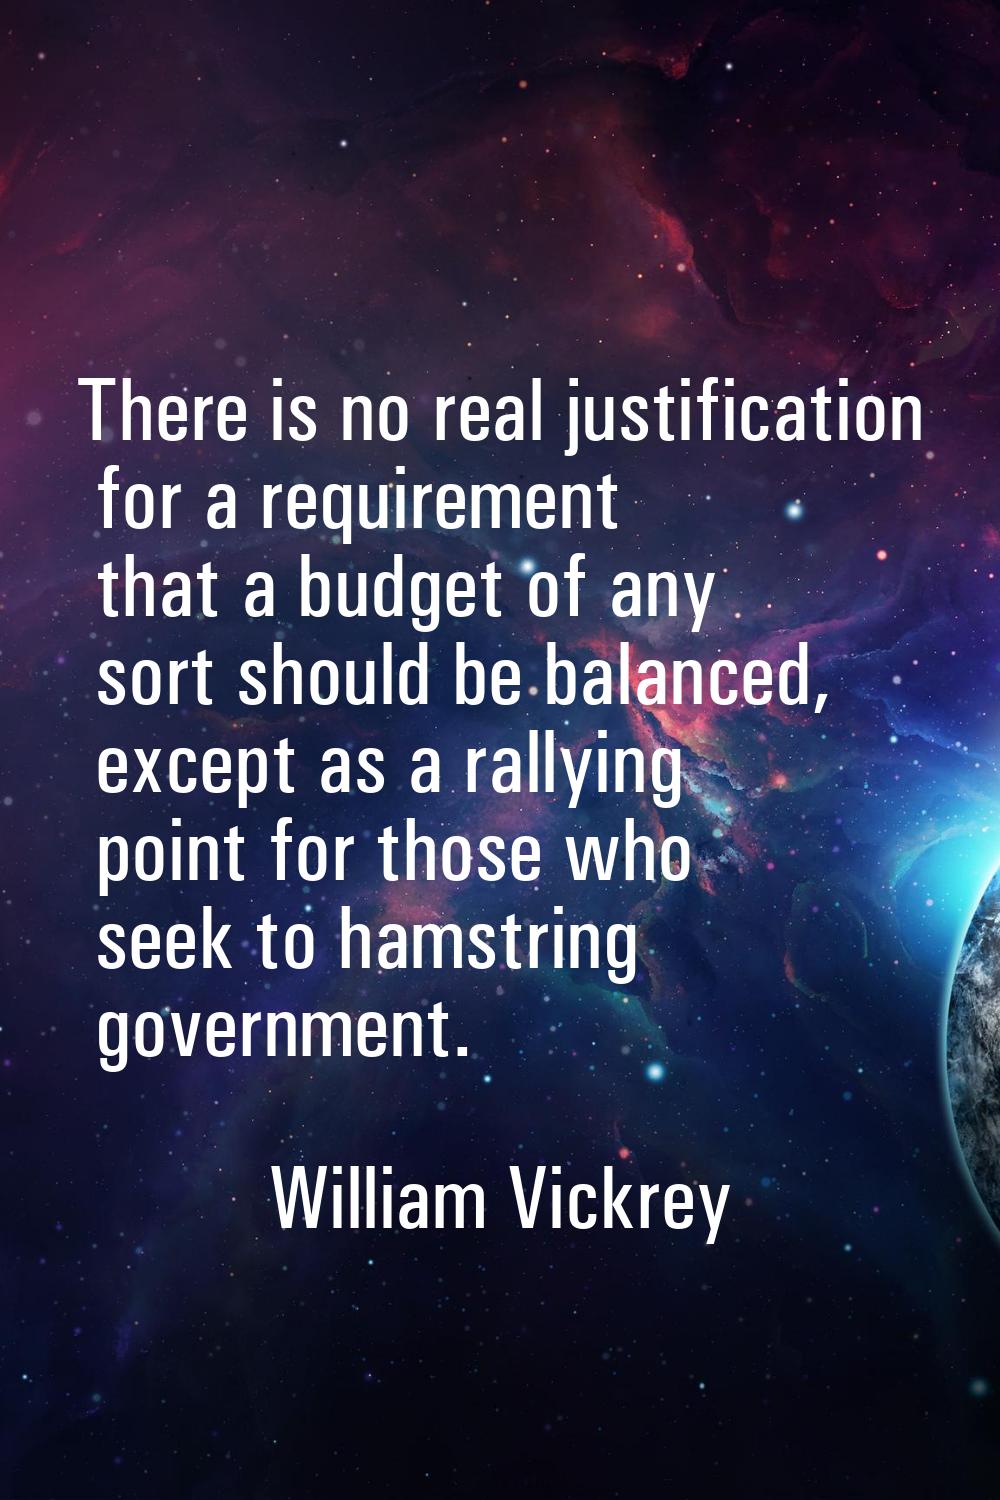 There is no real justification for a requirement that a budget of any sort should be balanced, exce